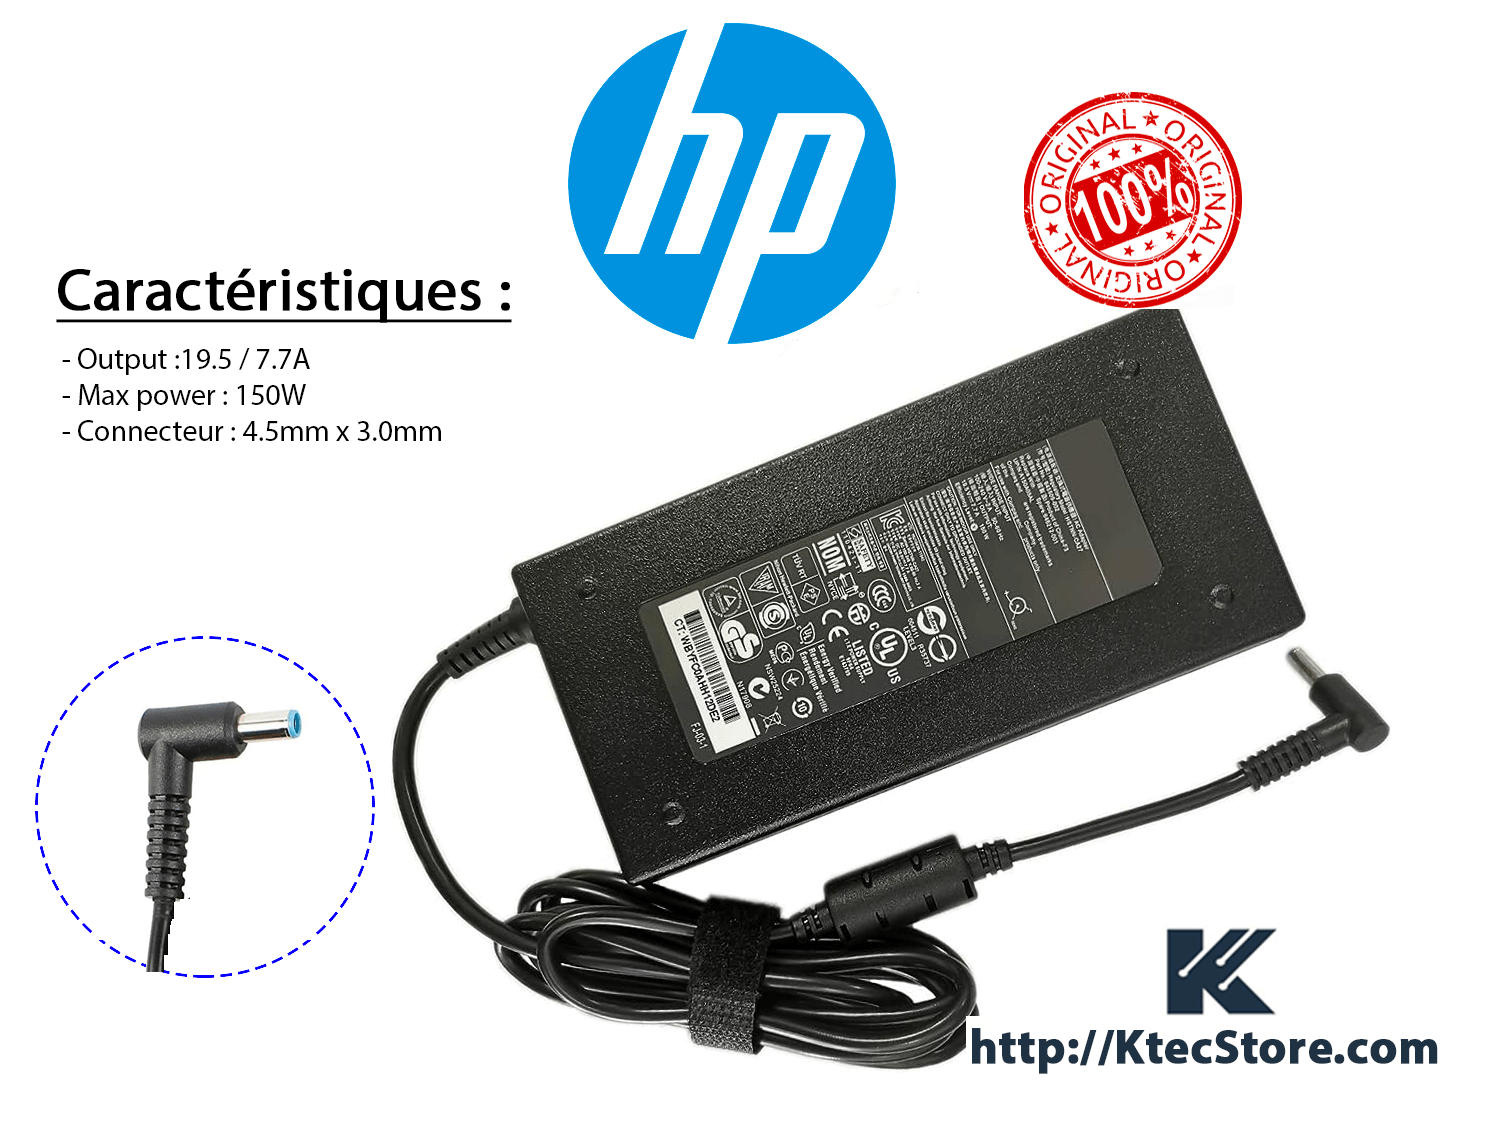 Chargeur HP 200W - Chargeur & Alimentation - Yaratech #1 Boutique Hightech